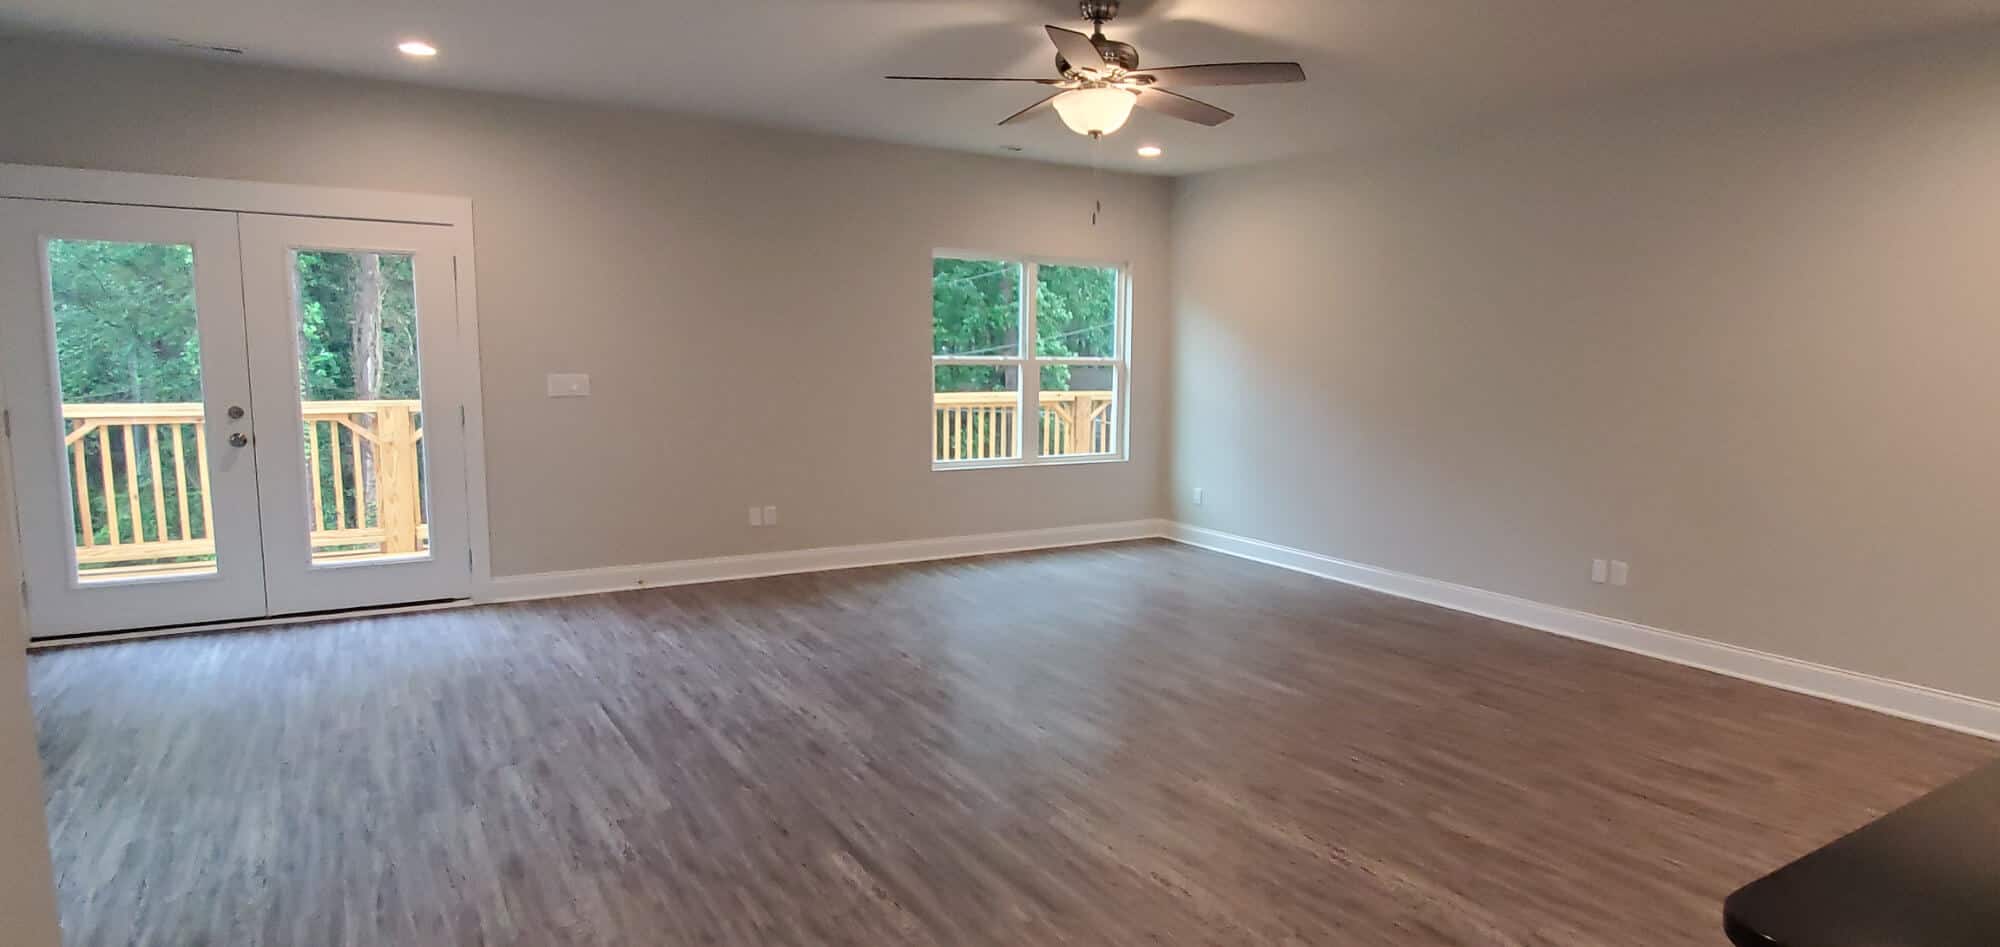 raleigh off campus apartments marcom st off campus apartments near nc state university open floor plan spacious living room